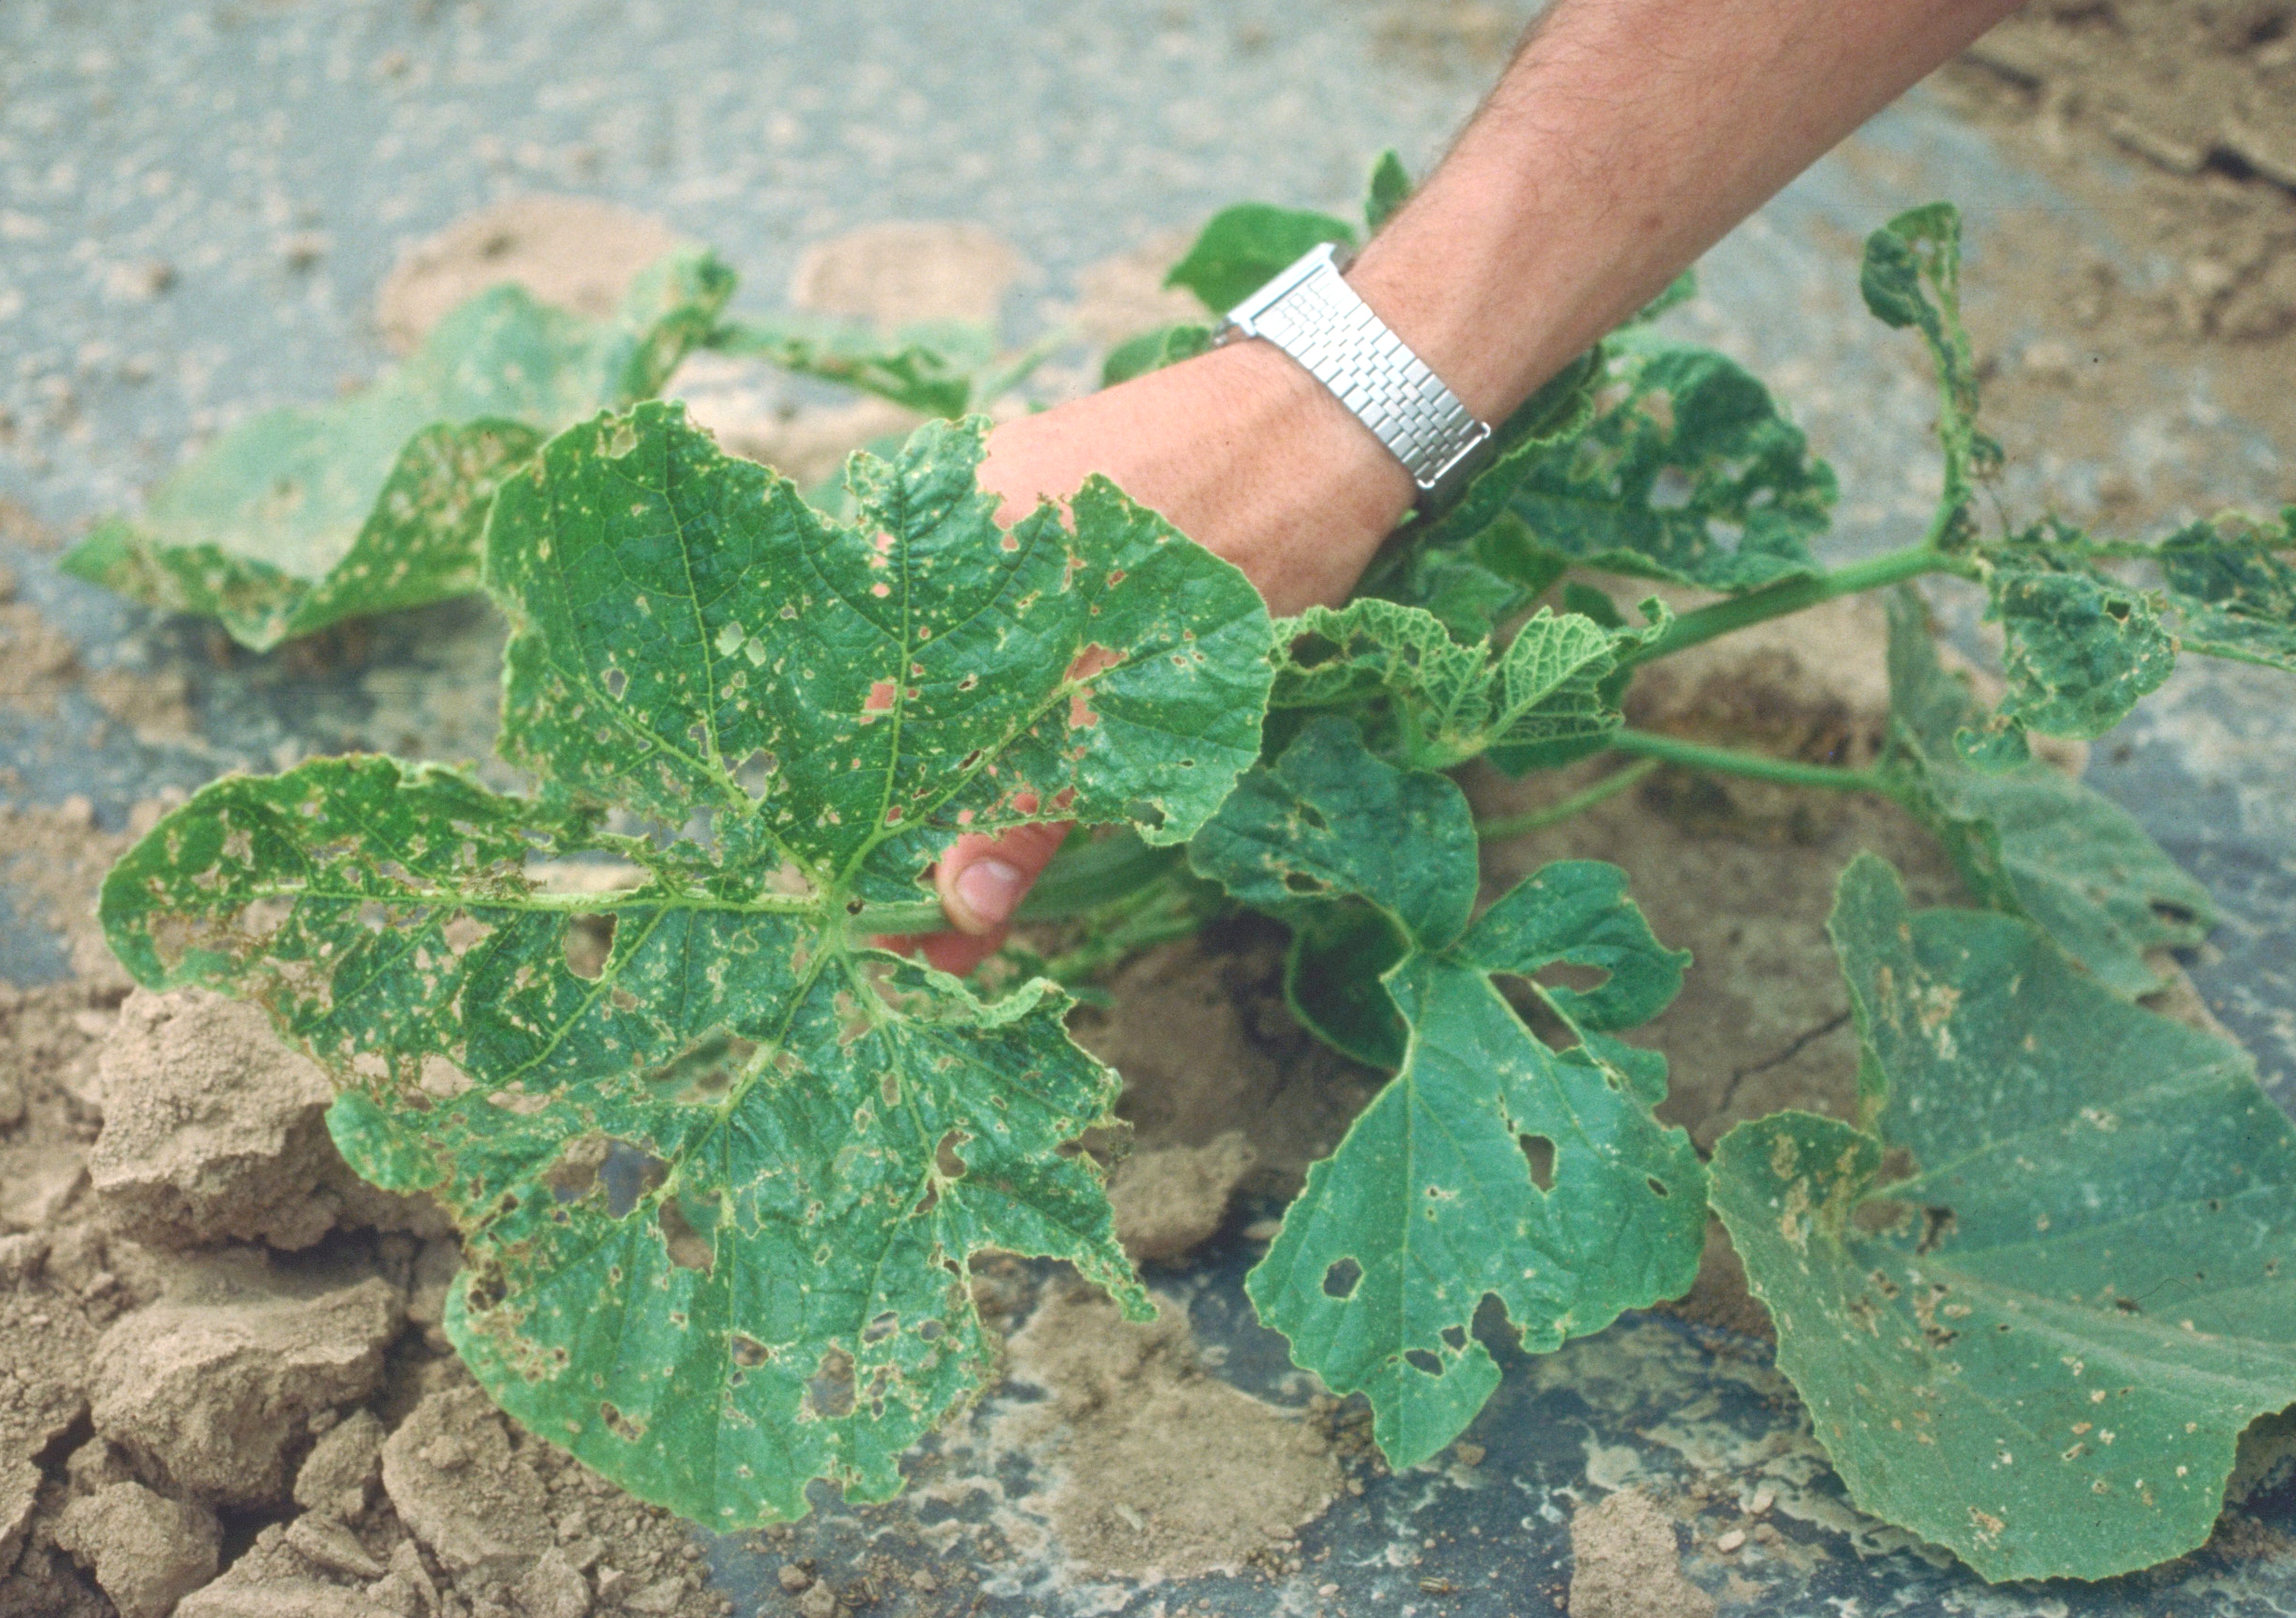 Cucumber beetle damage to leaves.